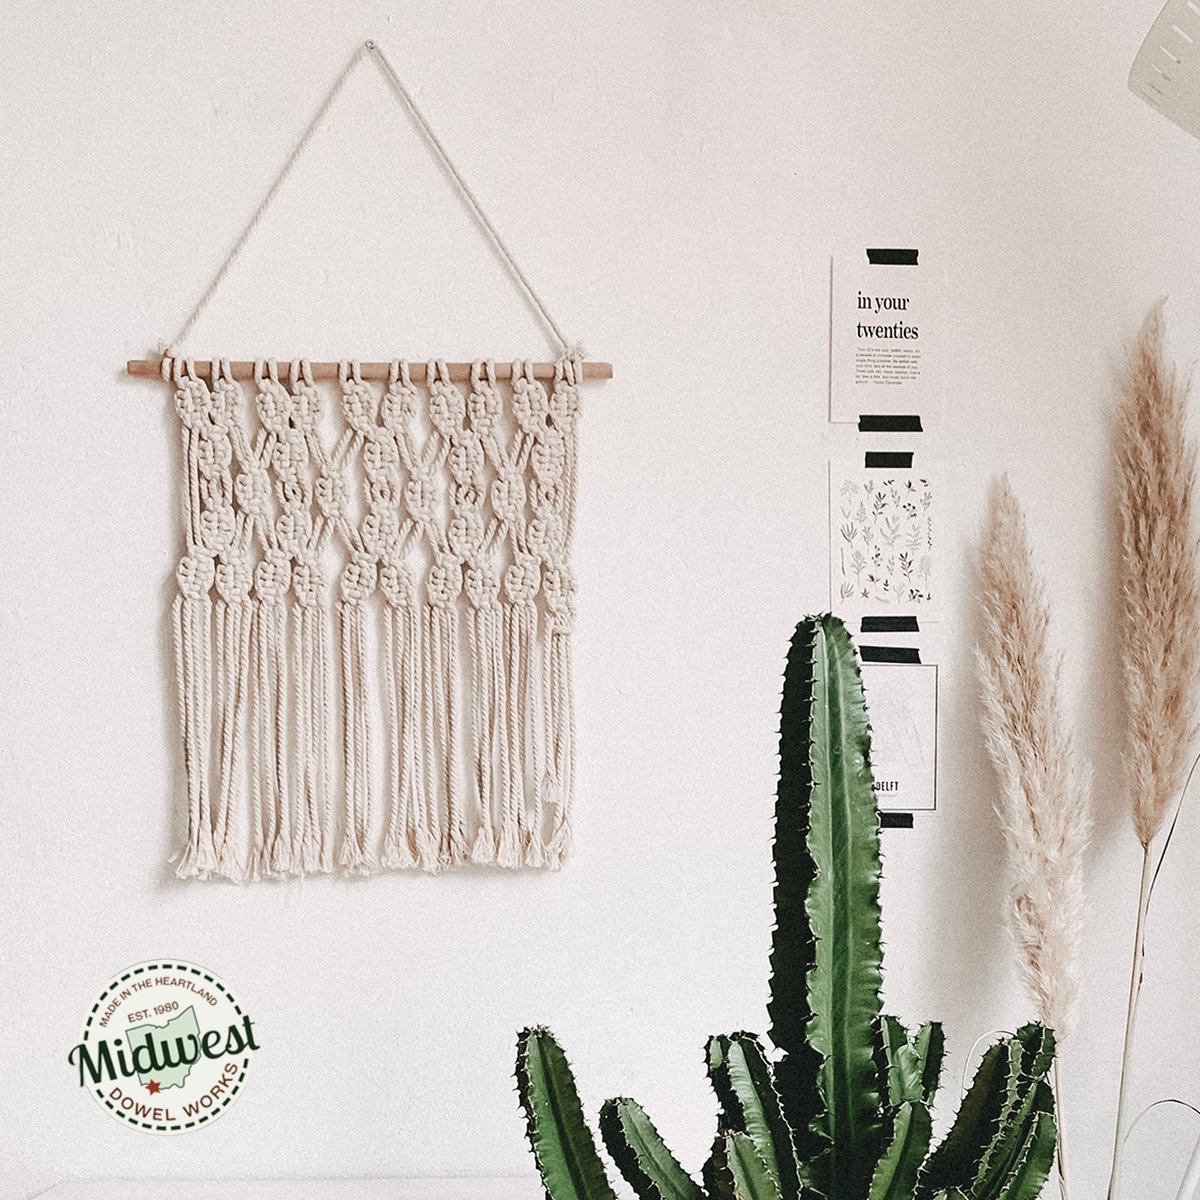 Create wonderful pieces of décor for your home with simple supplies like this yarn wall piece!

Shop today and see what you can make.👇
shop.midwestdowel.com/shop/dowels-1?…

#DIY #HomeDecor #DIYInspo #Woodworking #Dowels #Crafting #Cincinnati #Midwest #Ohio #Craftsman #MidwestDowel